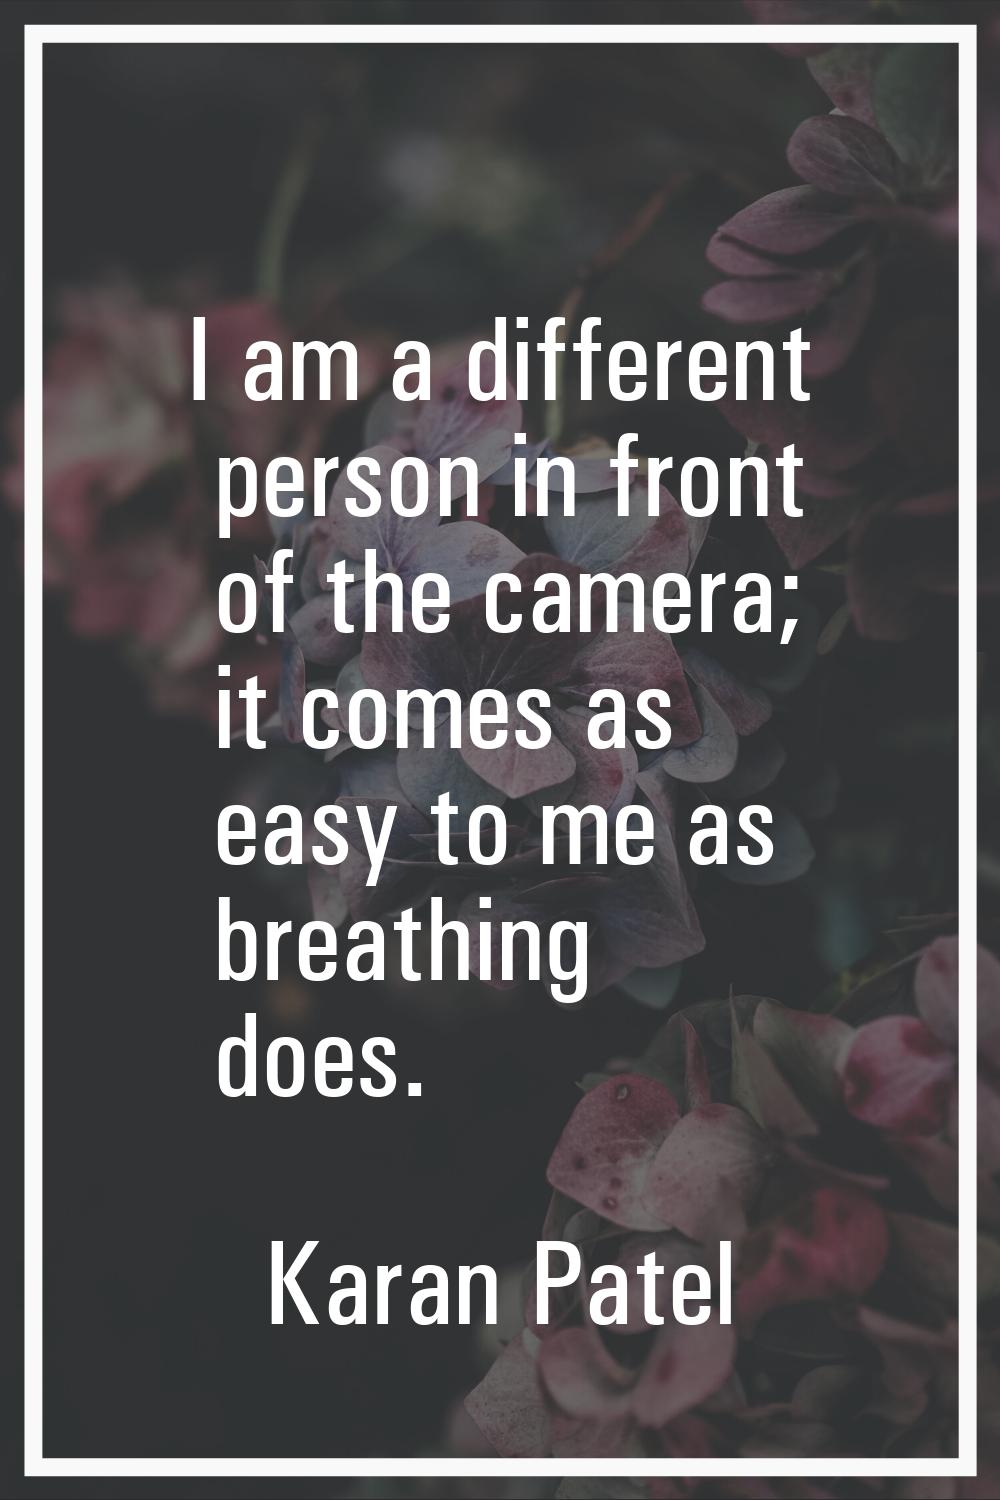 I am a different person in front of the camera; it comes as easy to me as breathing does.